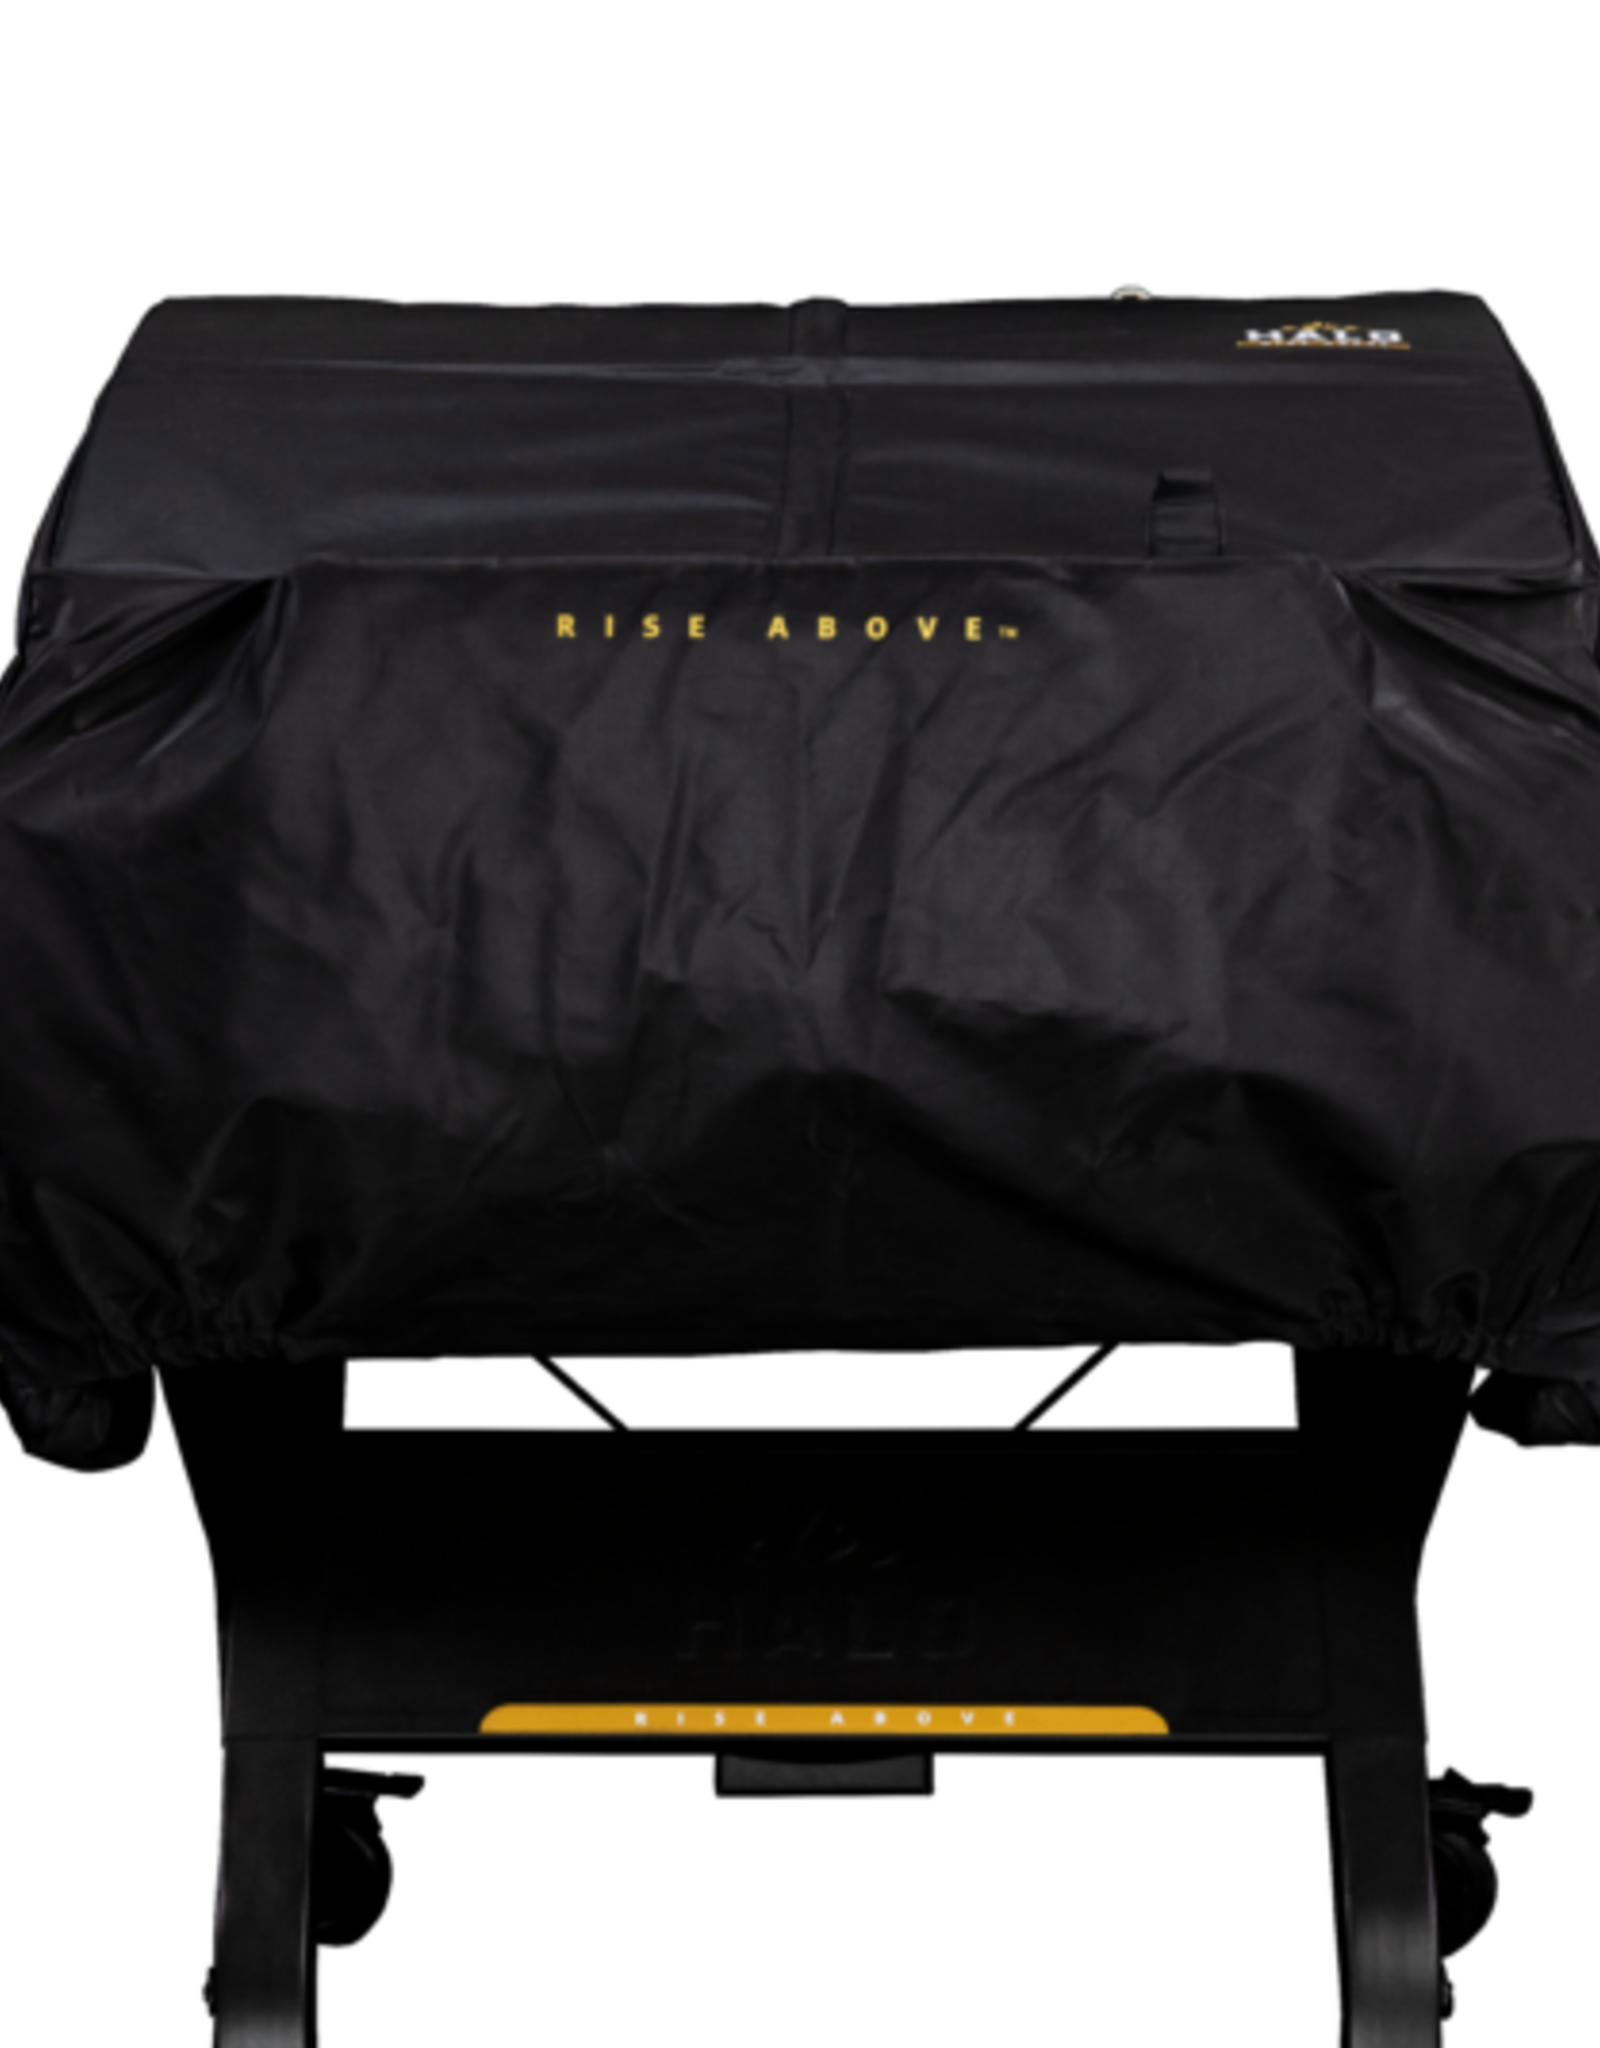 Halo Products Group Halo Elite 3B Griddle Cover - HZ-5002